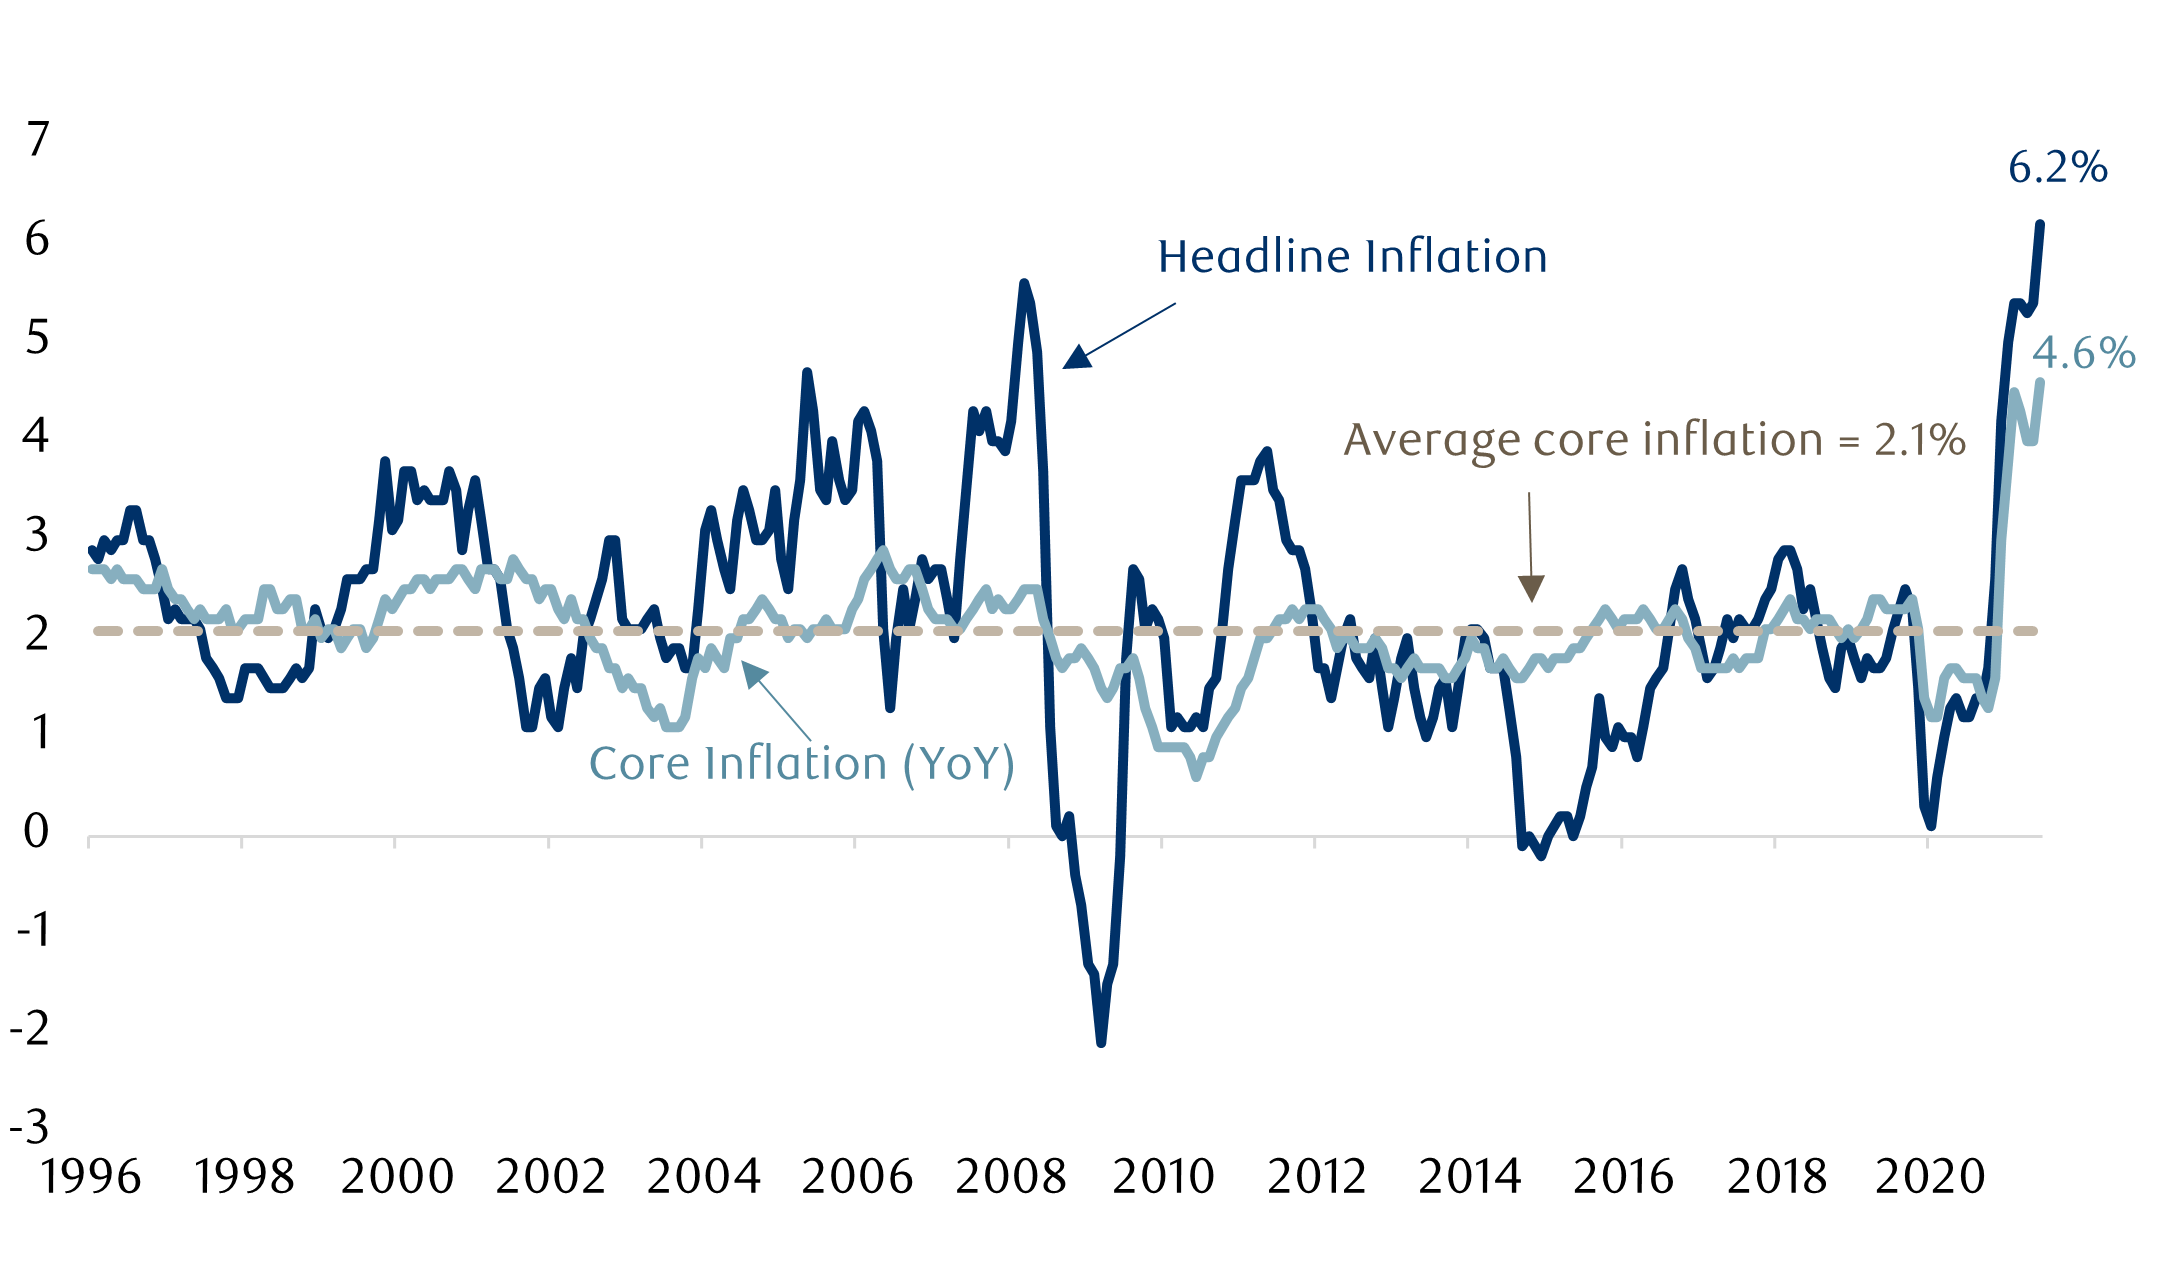 Headline and Core Inflation